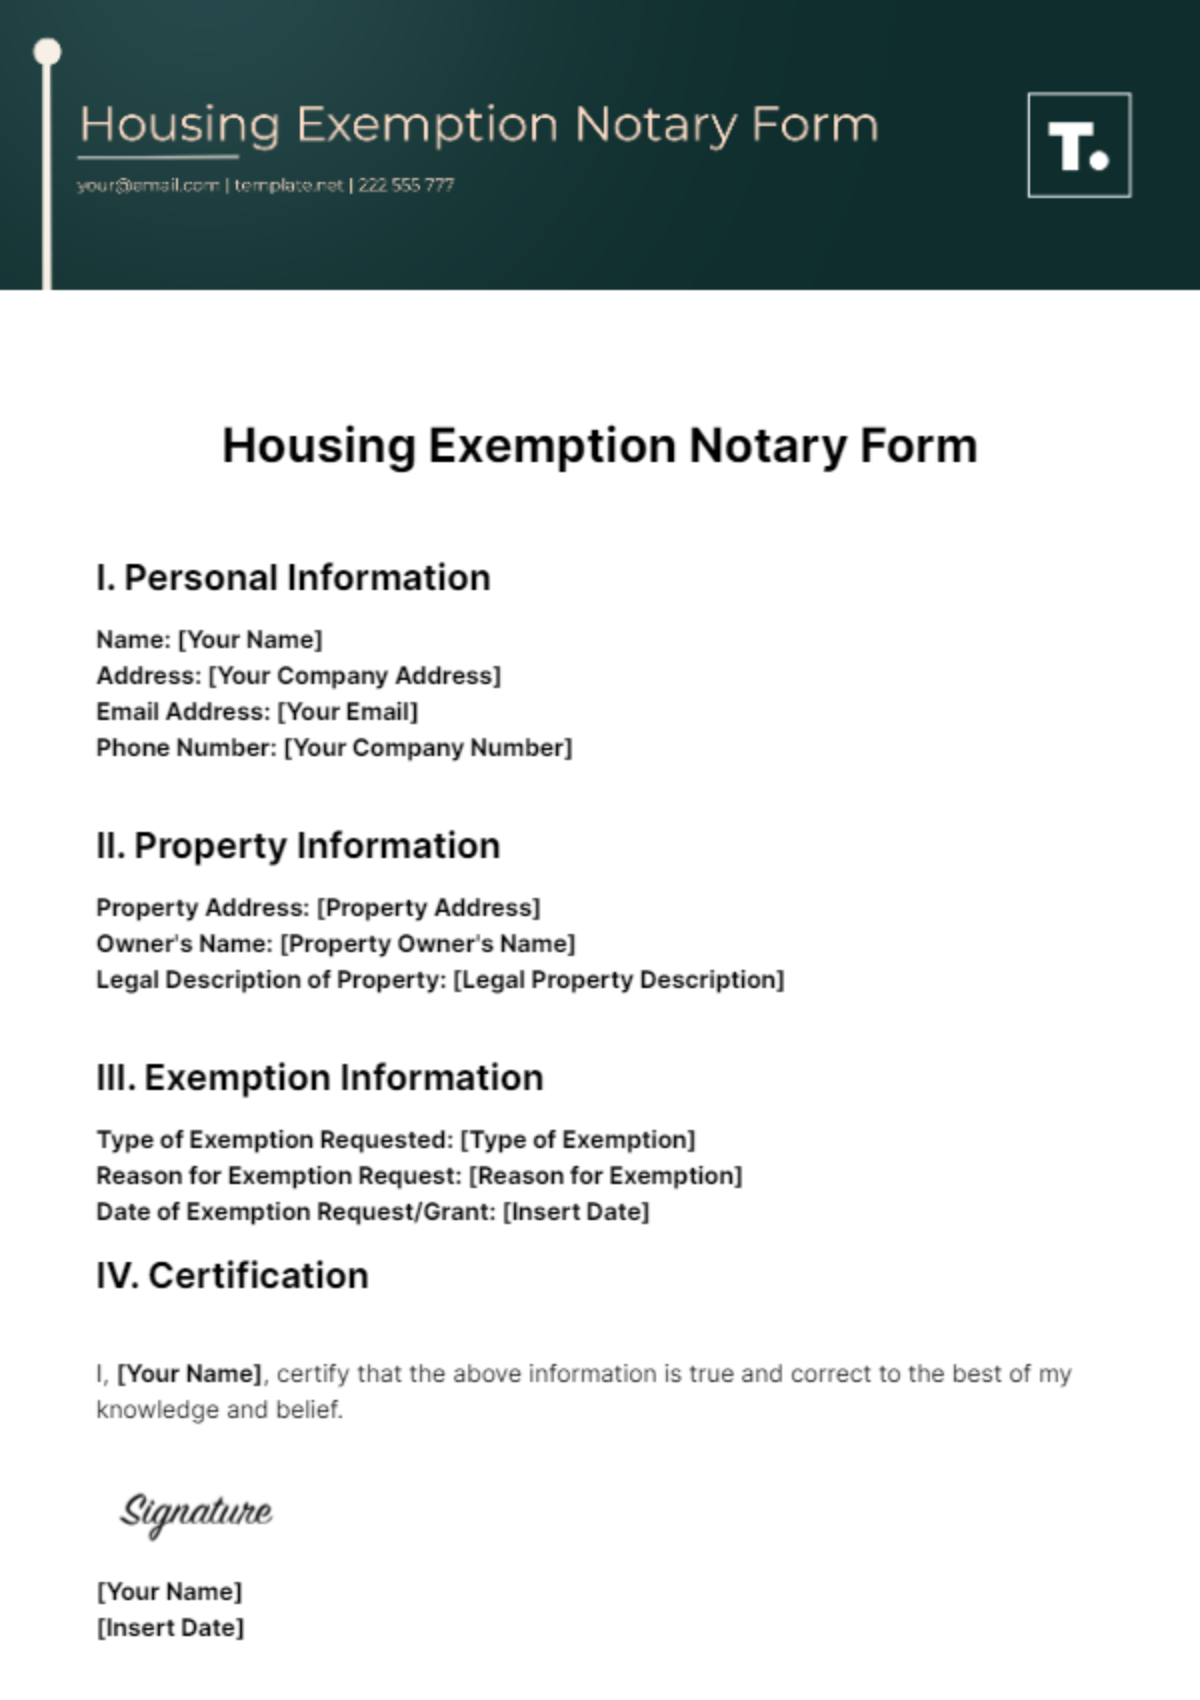 Free Housing Exemption Notary Form Template